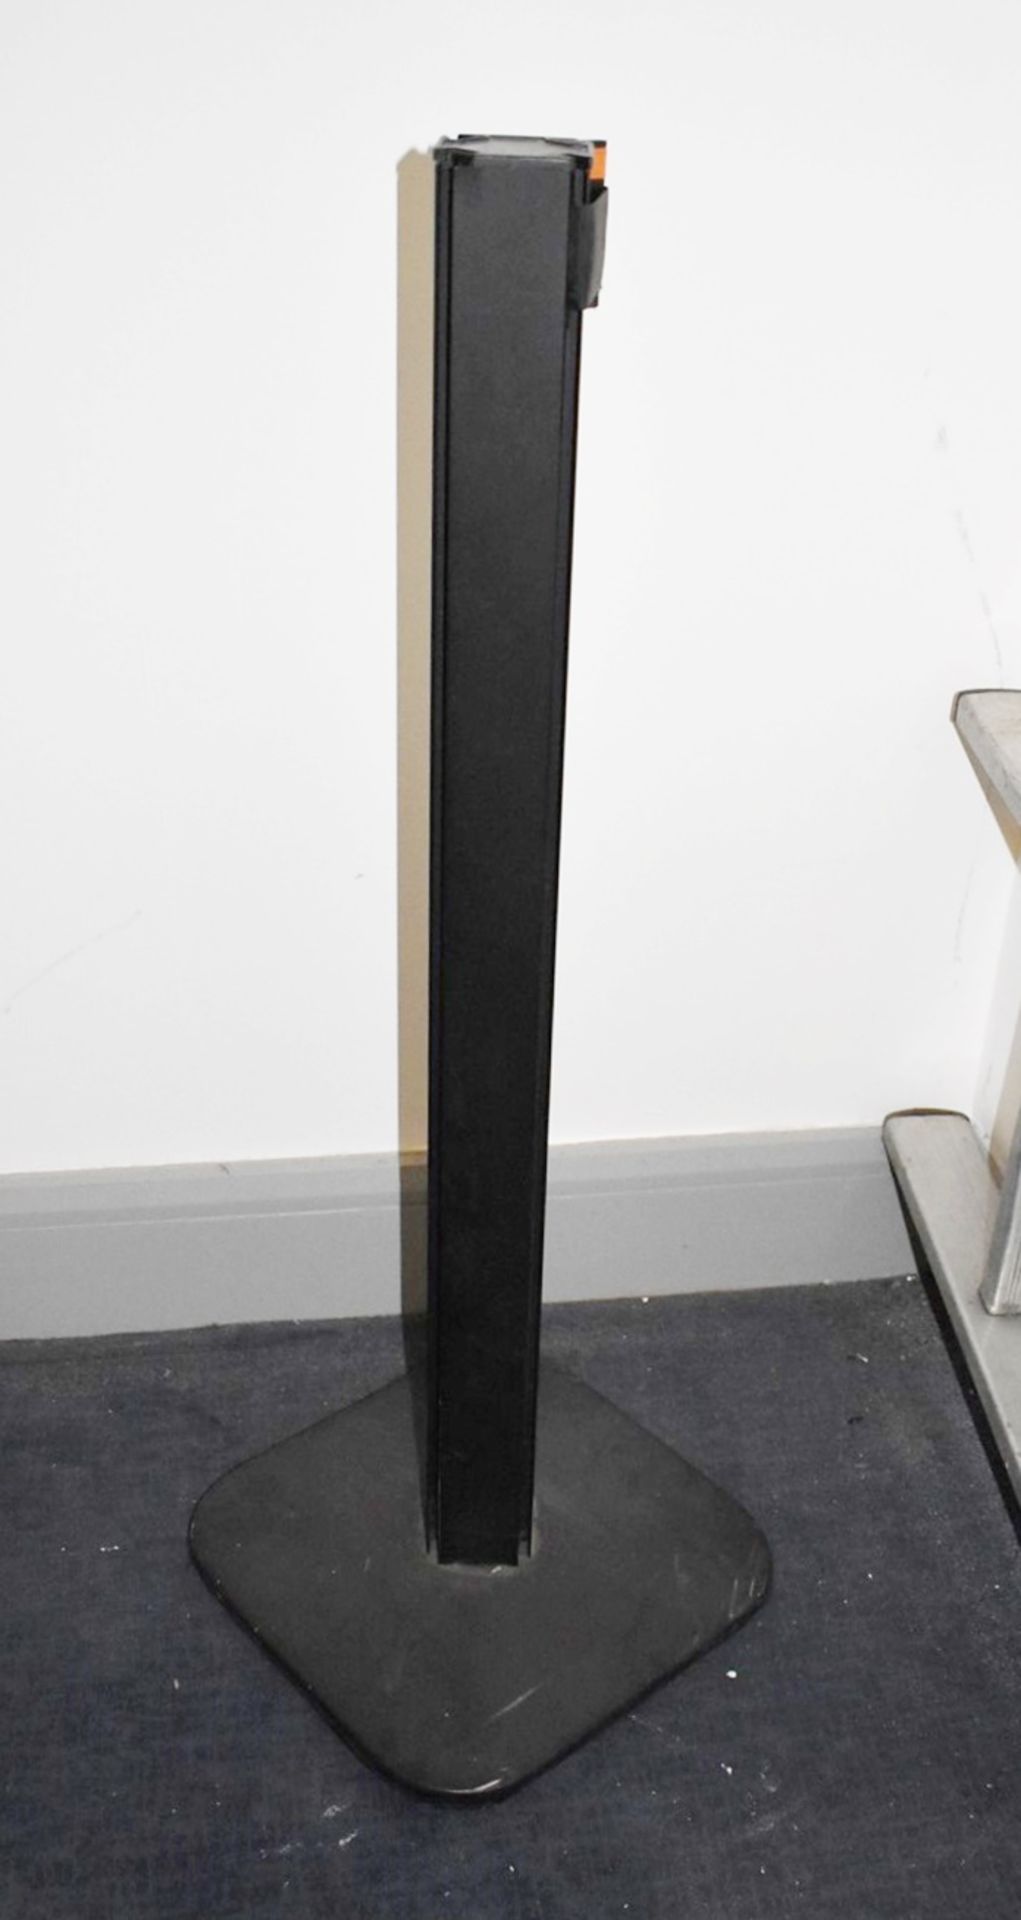 2 x Crowd Control Queue Barriers With Rectractable Belts - Black Finish - Approx Height 95 cms - - Image 4 of 4